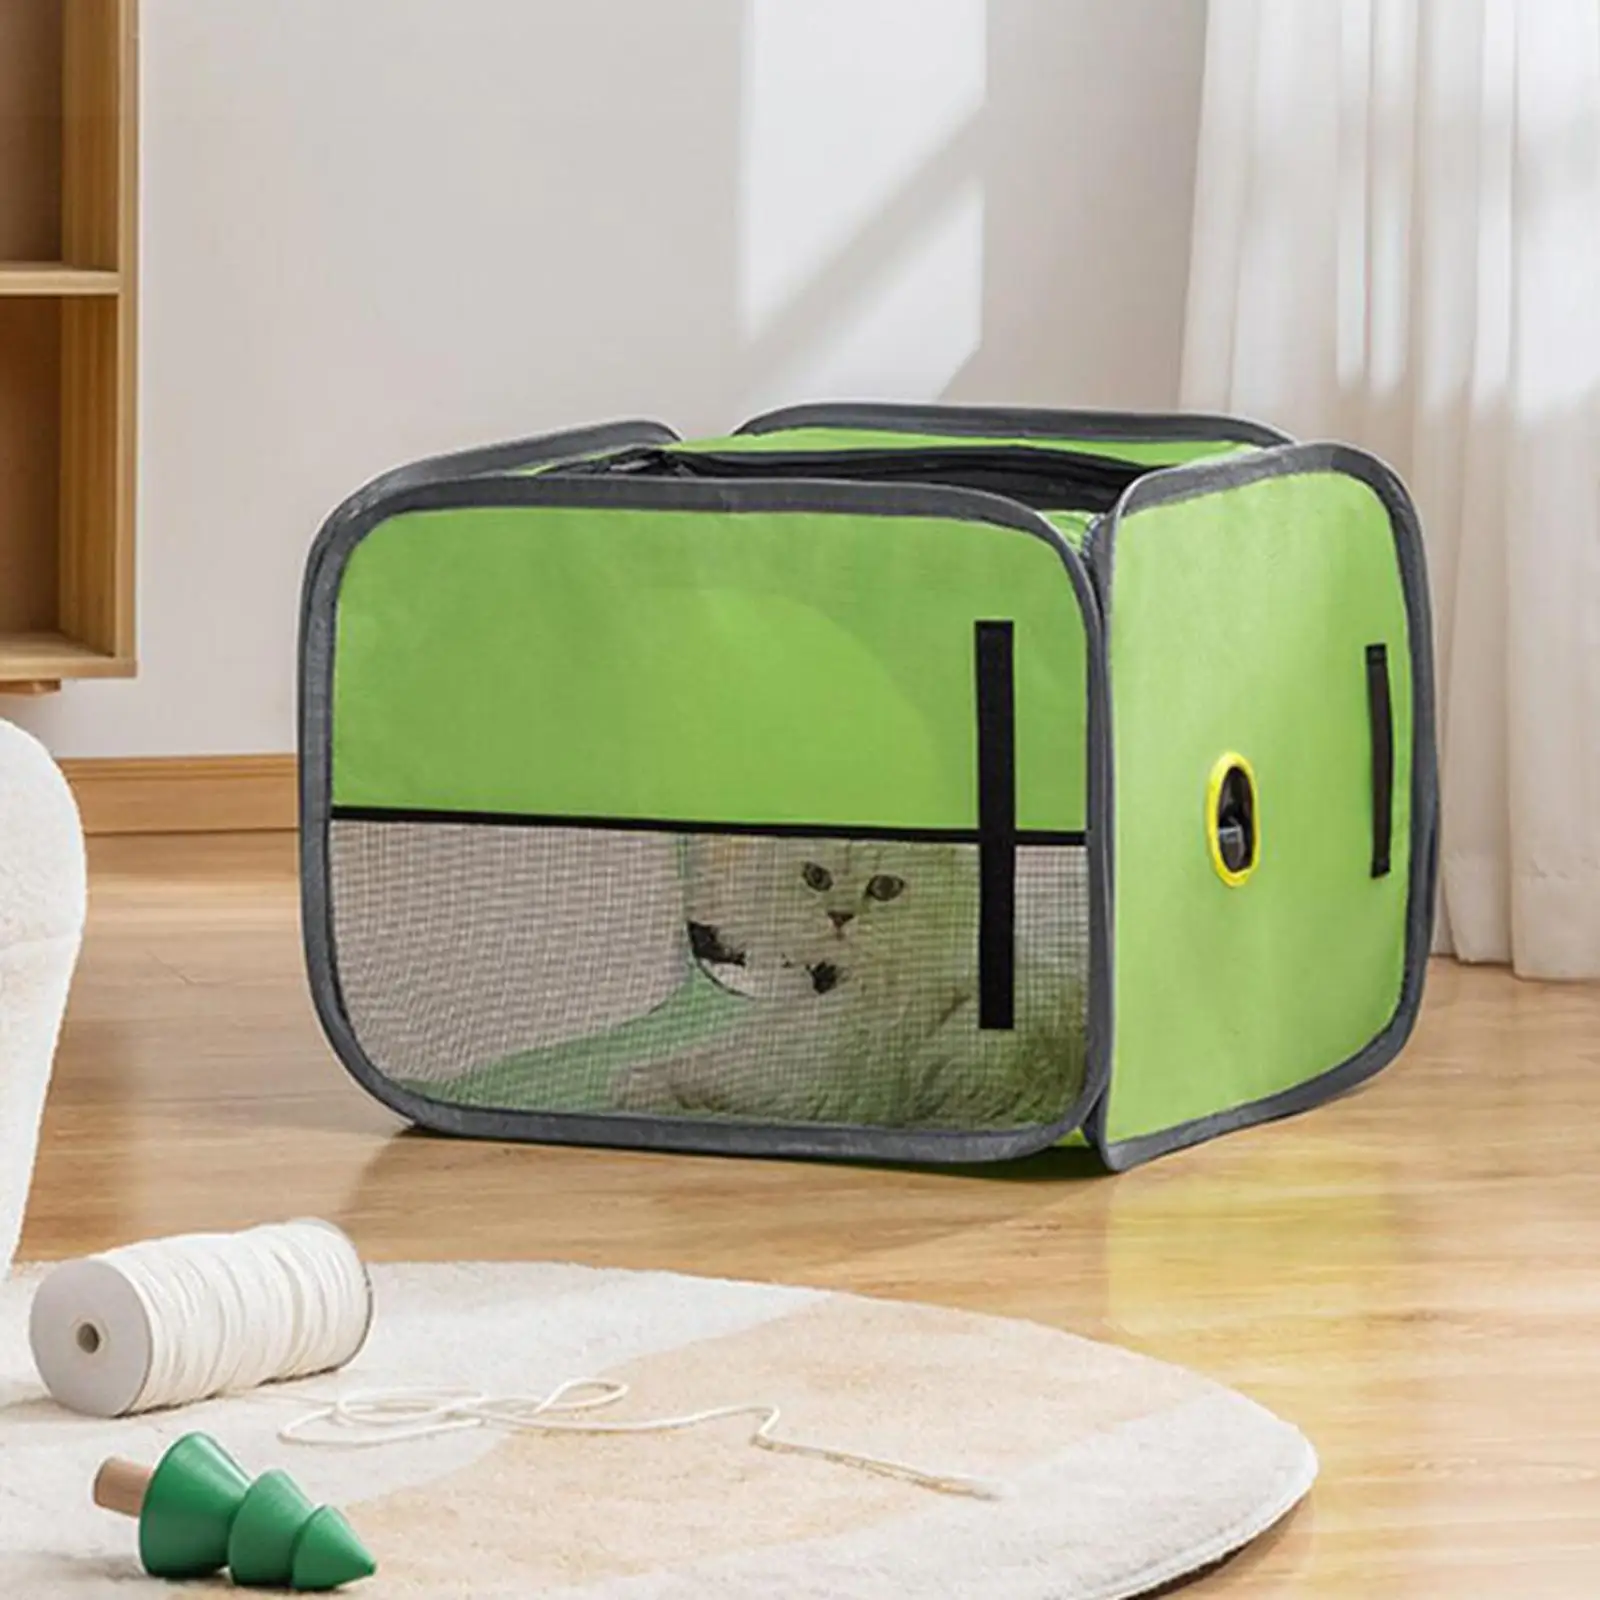 Pet Drying Box Hair Dryer Clean House Grooming Portable Anti Grab Cats Dogs Dryer Cage Drying Room for Shower Kitty Outdoor Bath